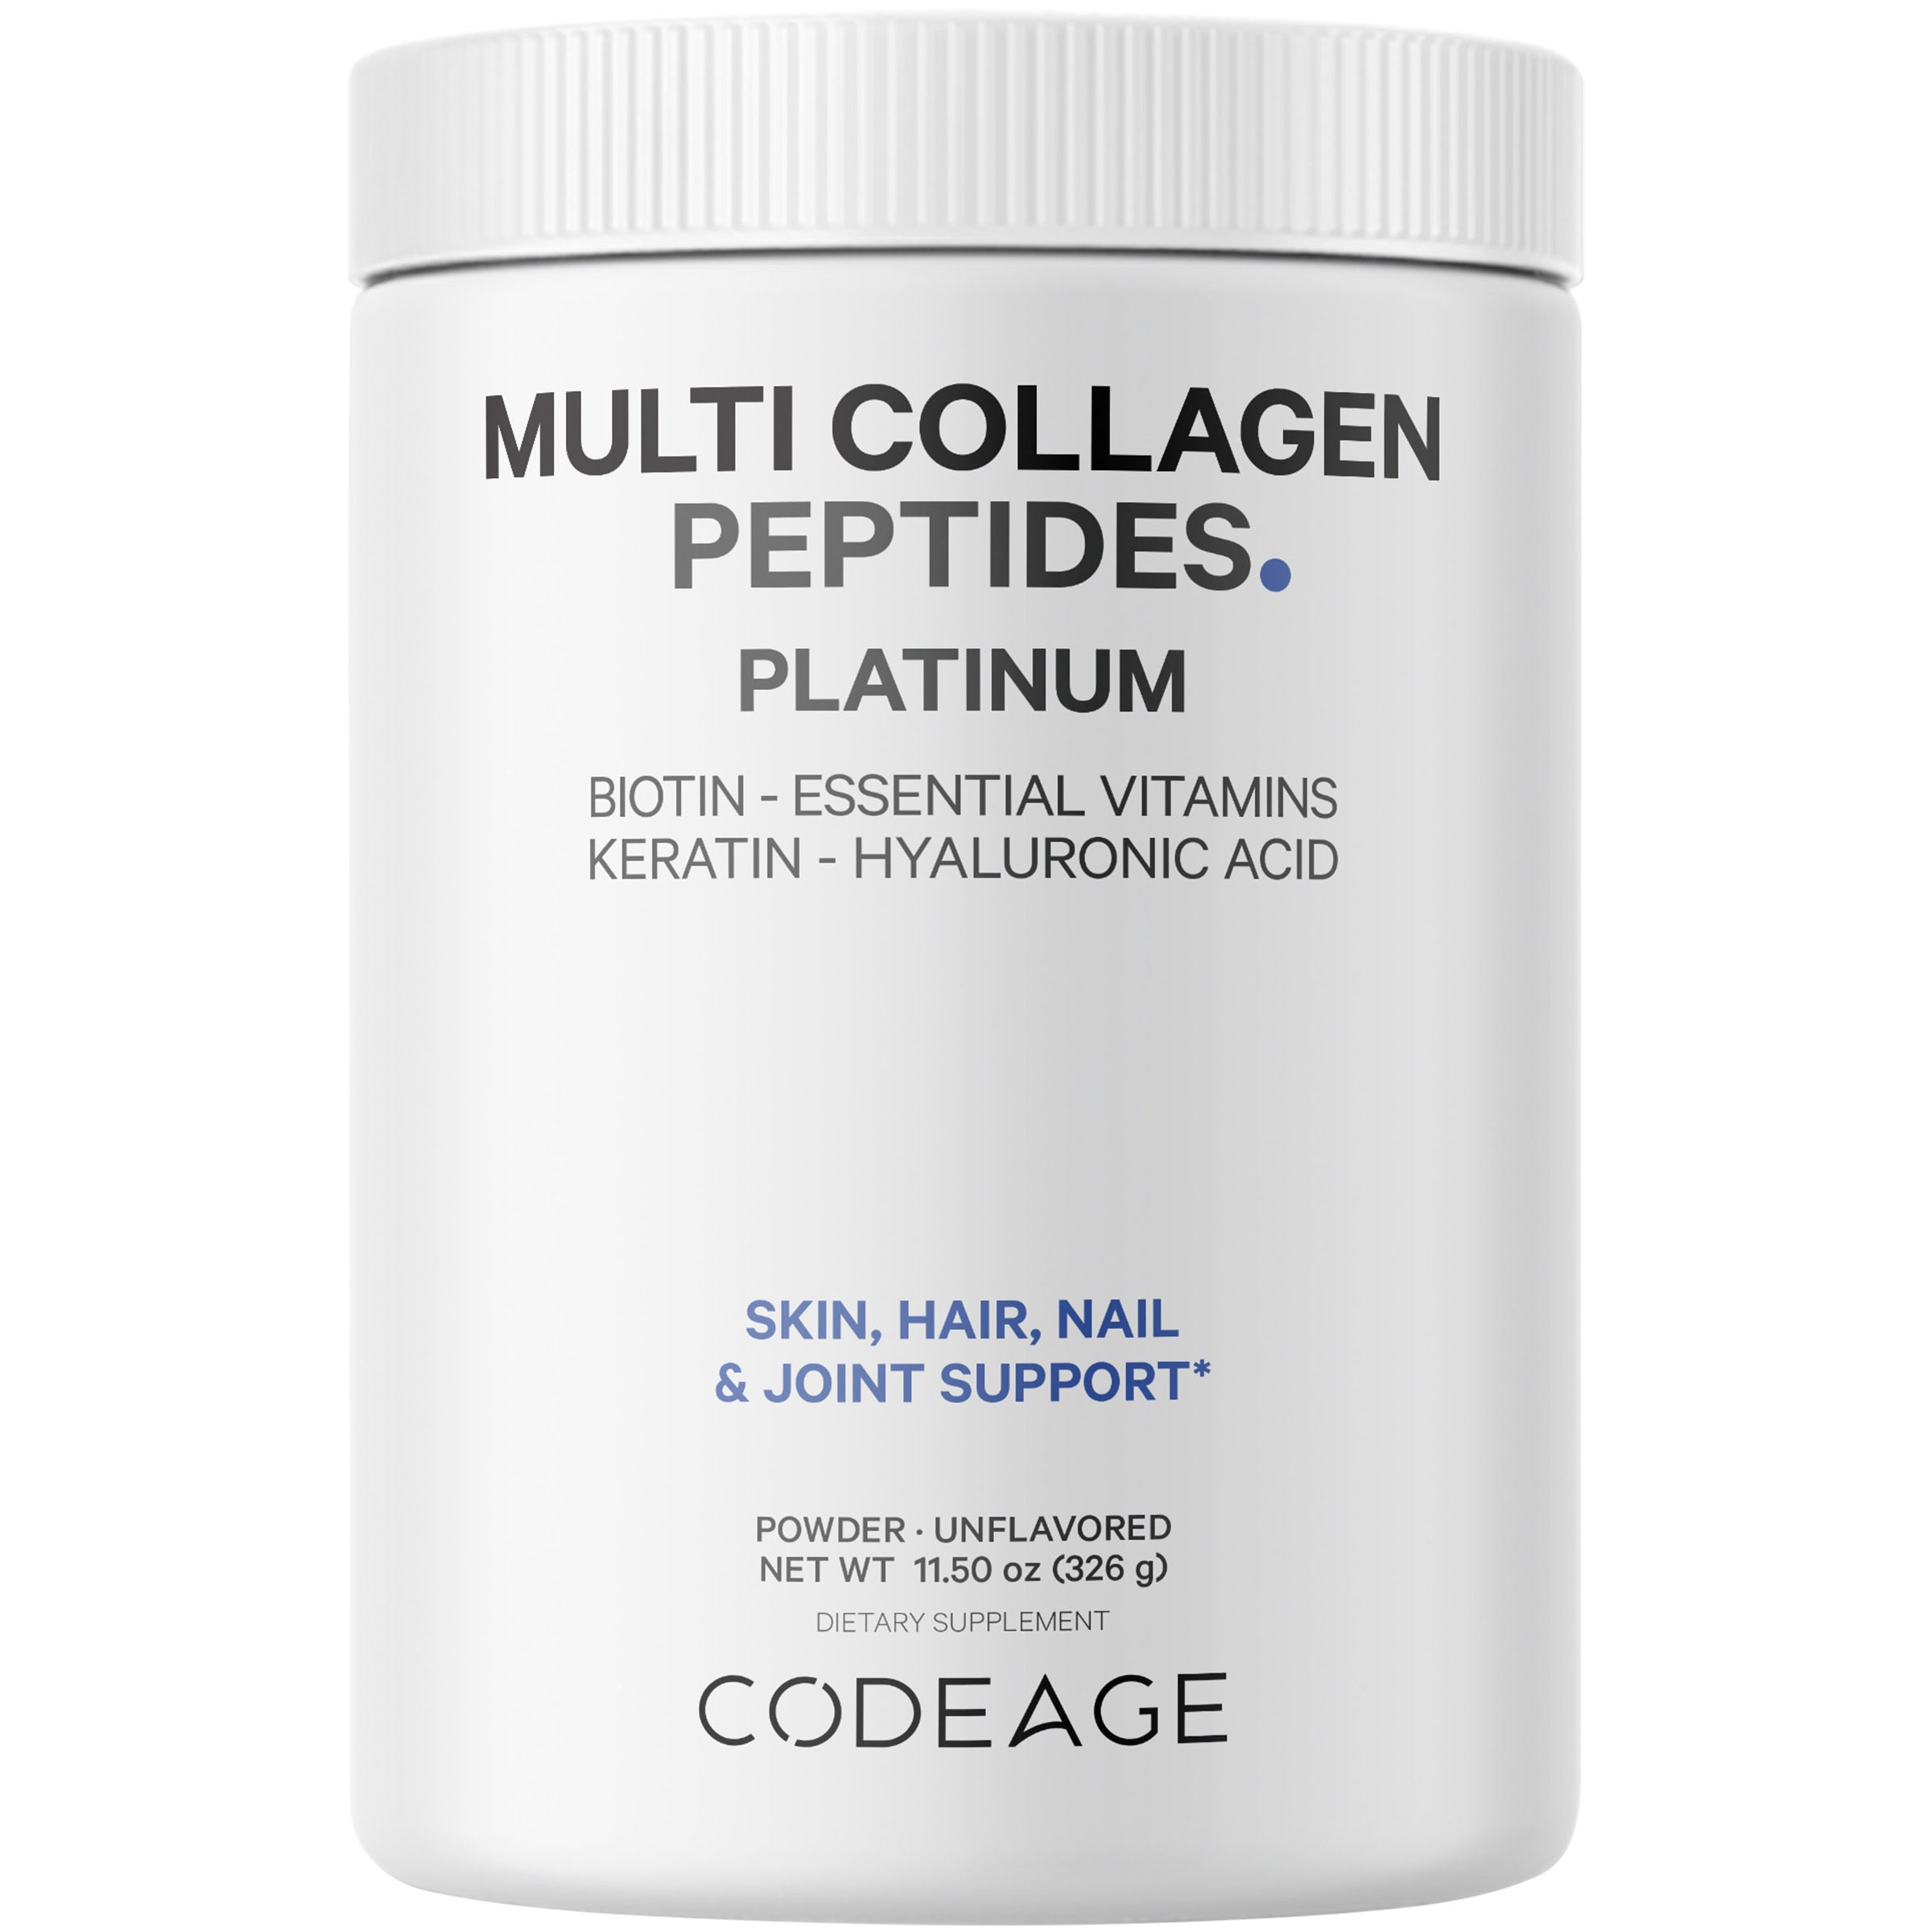 Multi Collagen Peptides Powder with Biotin Keratin Hyaluronic Acid for Hair Skin Nails & Joints by Codeage - High-quality Collagen Supplement by Codeage at 